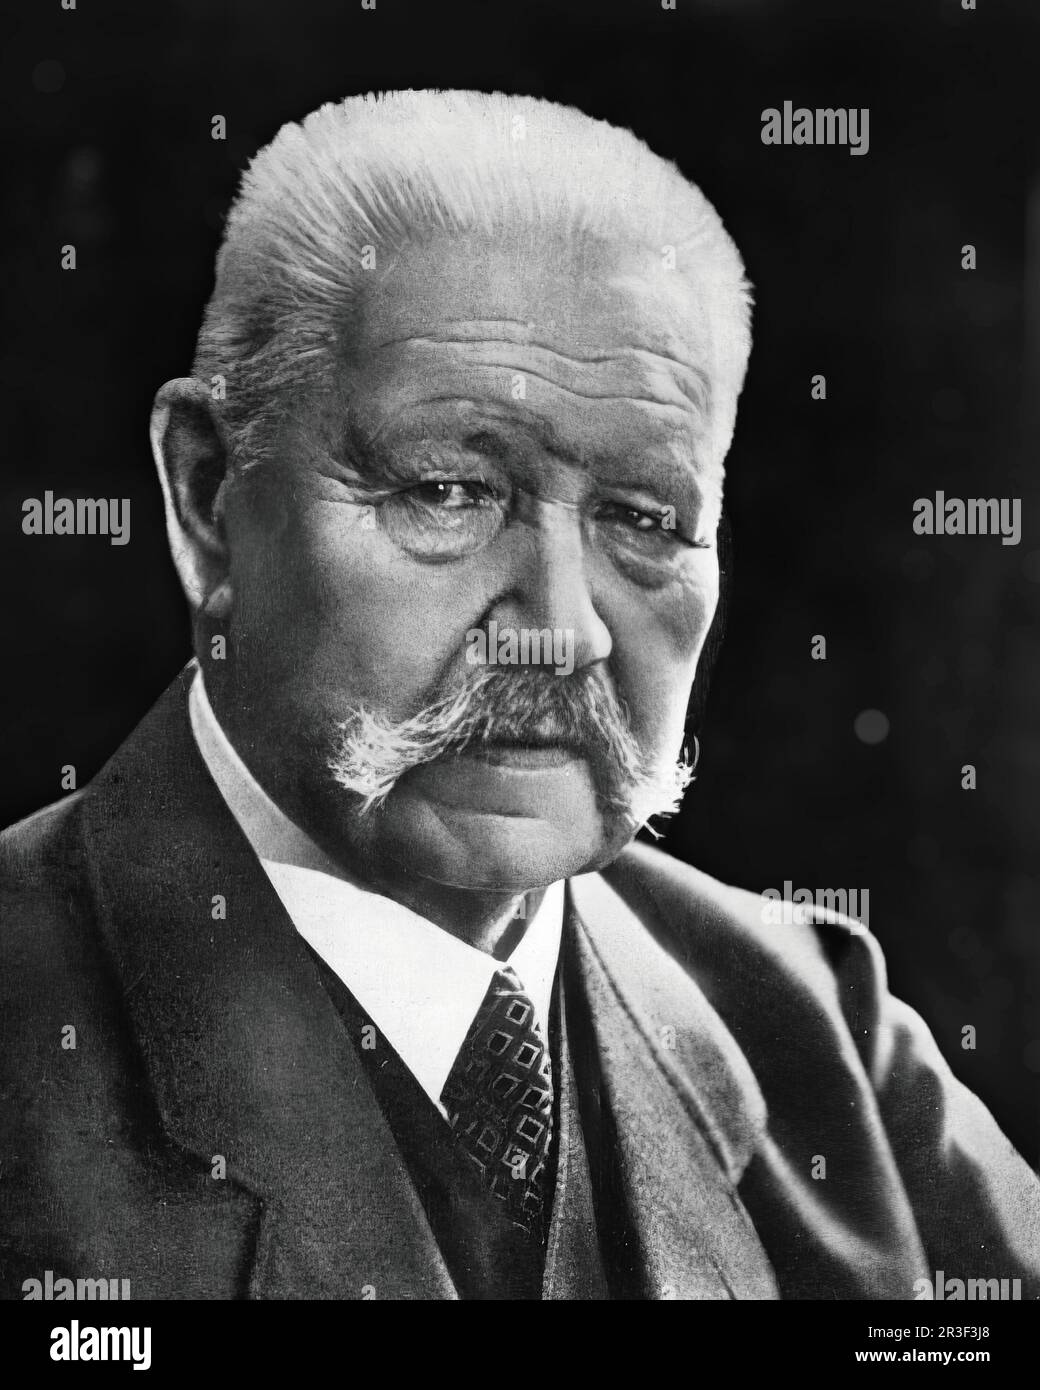 Paul Ludwig Hindenburg was a German general and politician. Important figure of the First World War, he commanded the German army Stock Photo